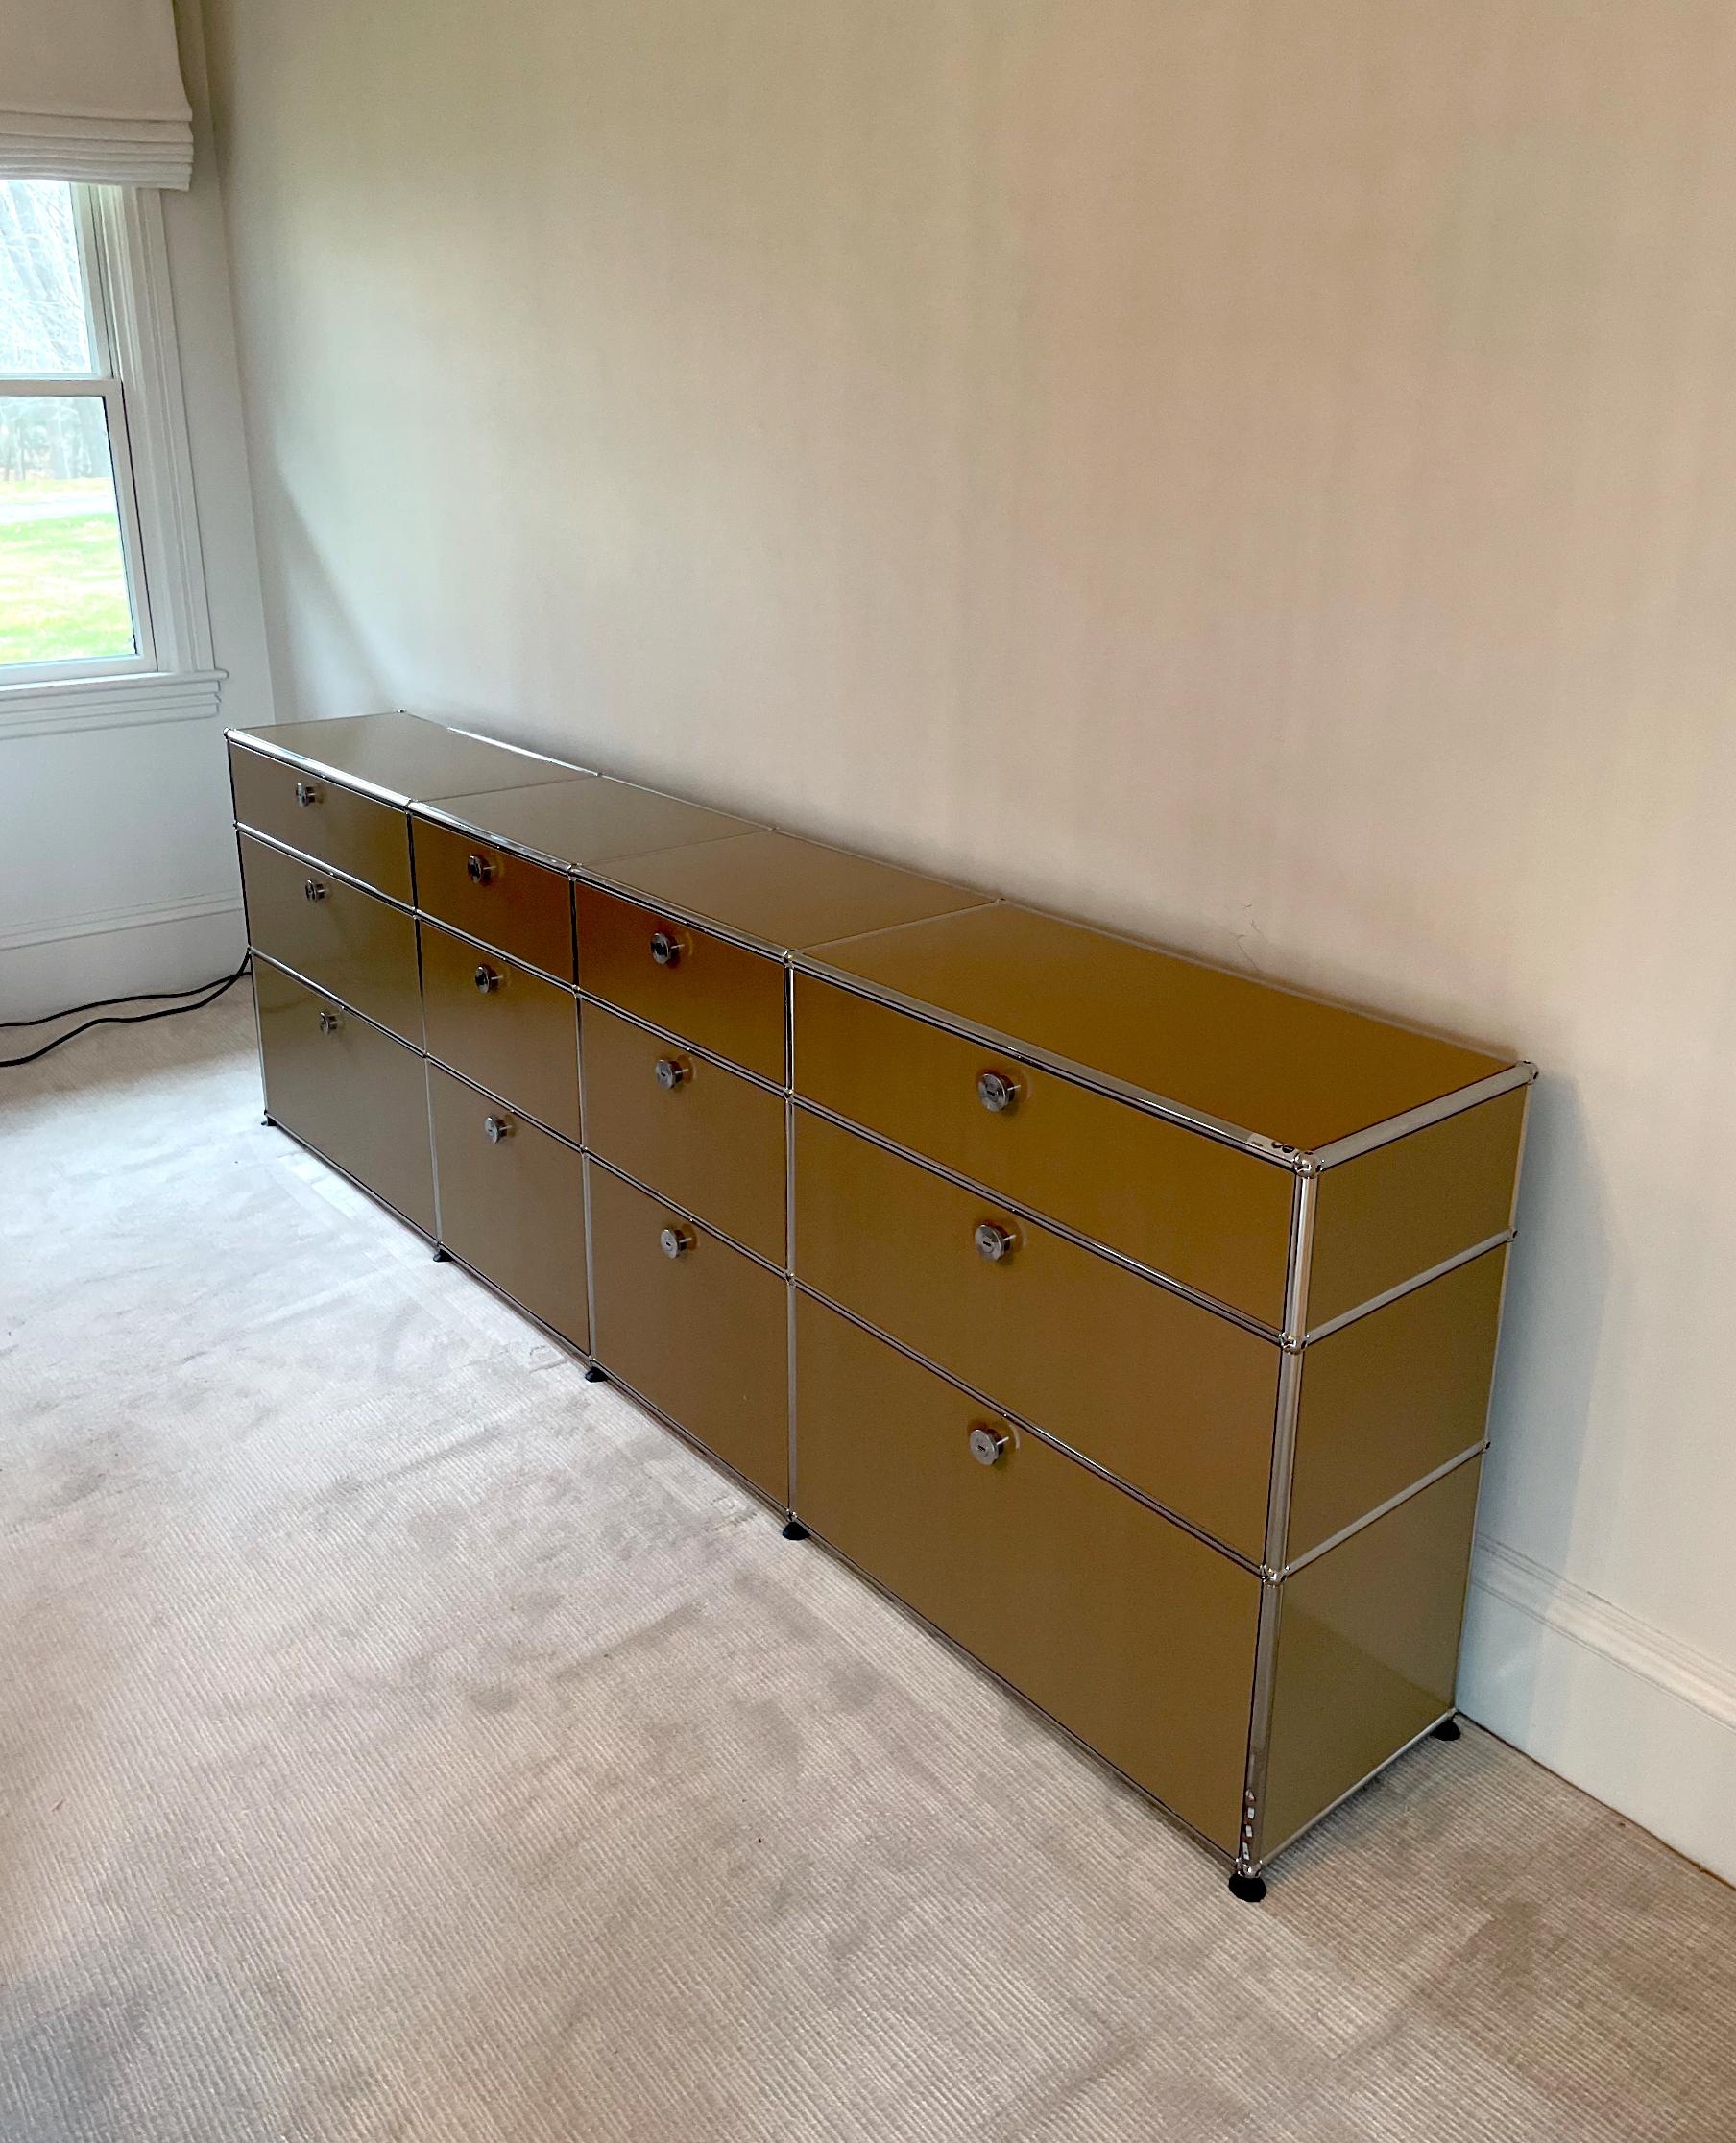 USM Haller dressert unit in Beige.
A timeless and versatile credenza. Designed by Swiss architect Fritz Haller and Paul Schaerer in 1963. Made from powder coated steel and chrome plated steel tubes, the USM Haller system is built to last for